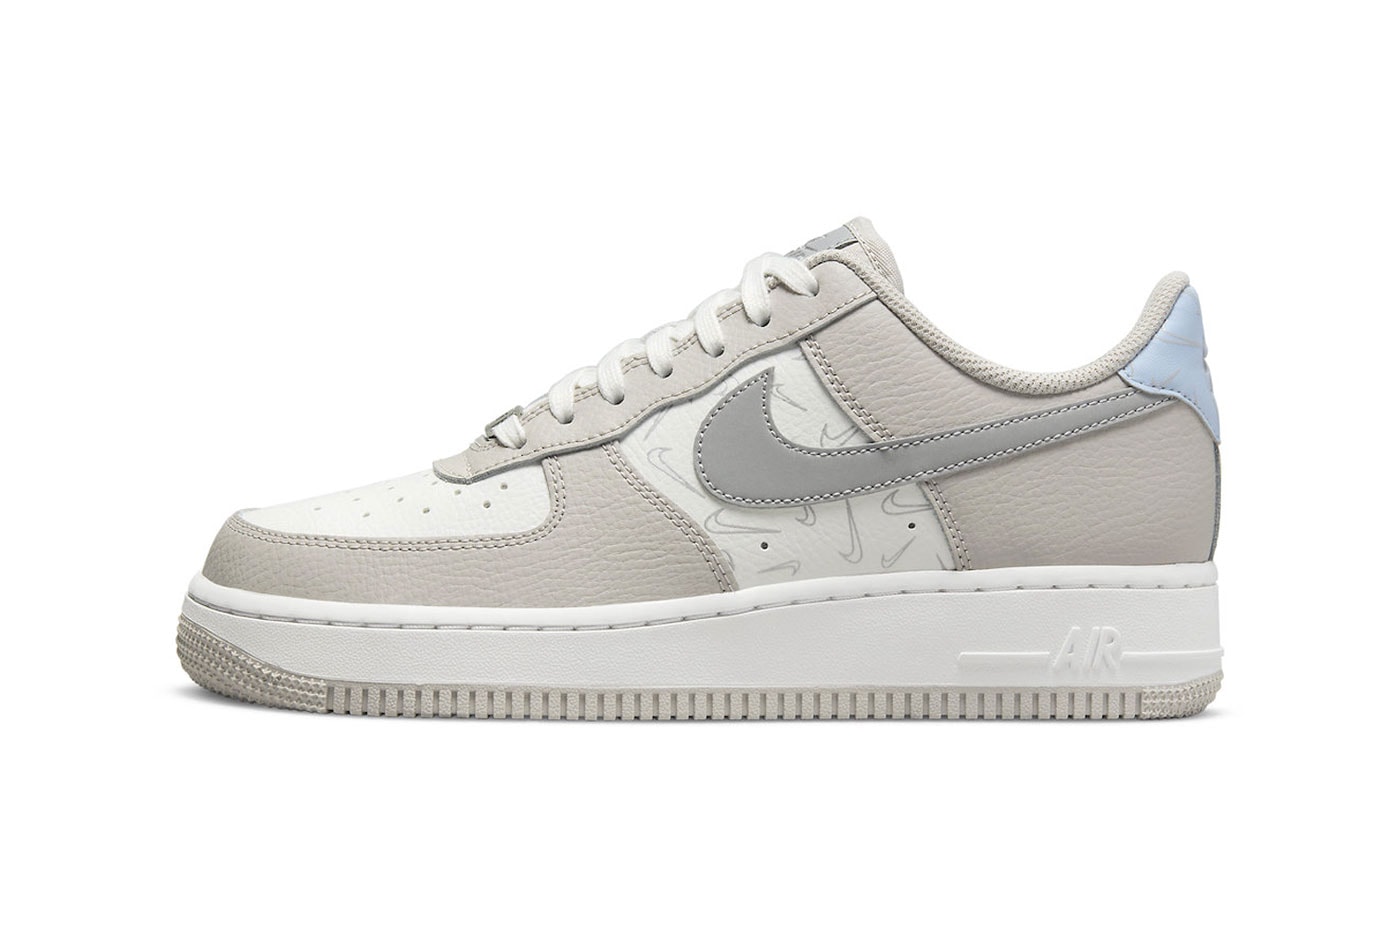 Nike Air Force 1 Low World Champ